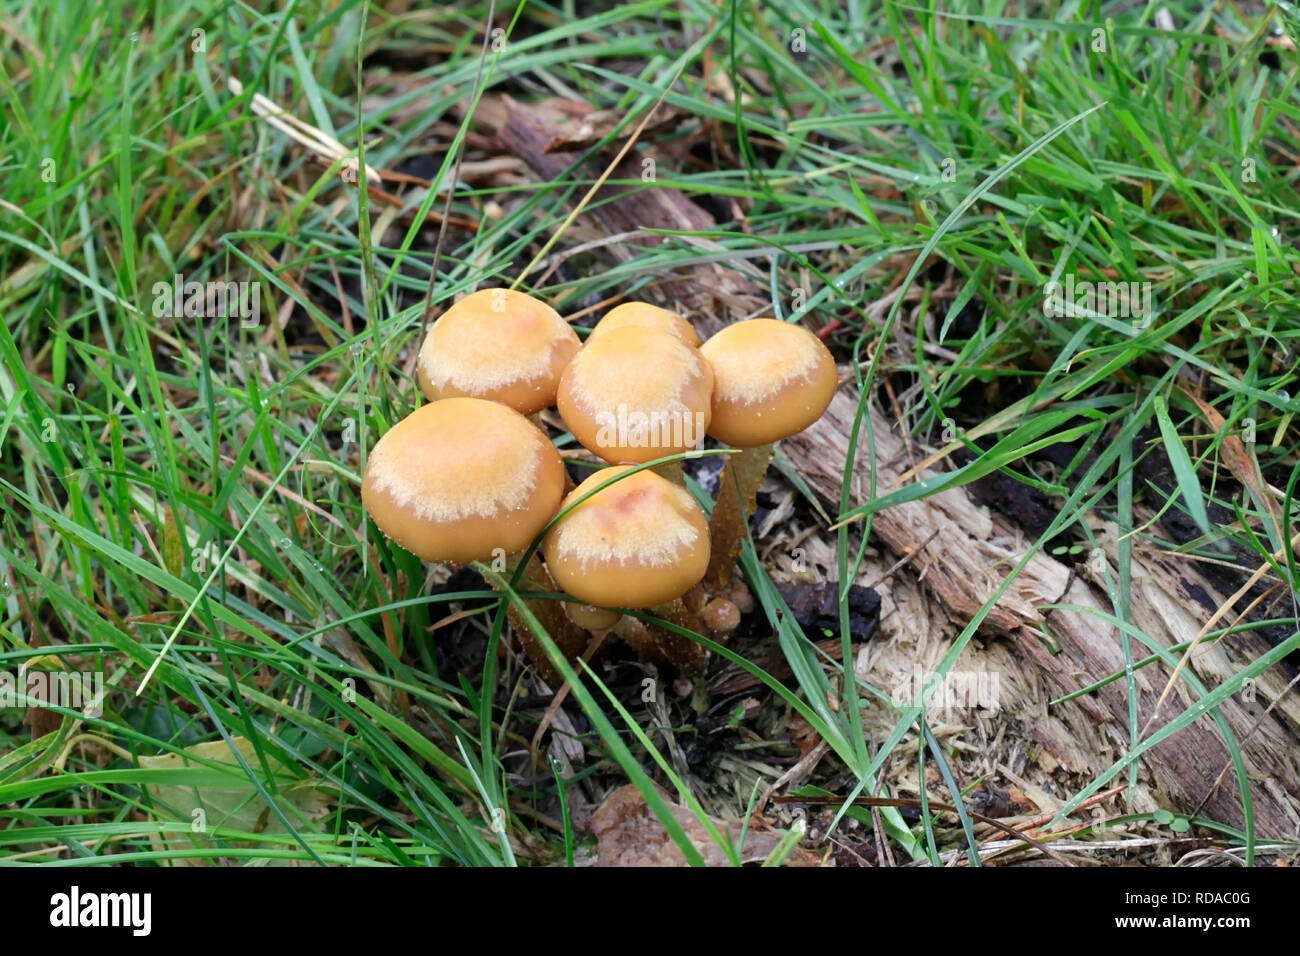 Kuehneromyces mutabilis (synonym: Pholiota mutabilis), commonly known as the sheathed woodtuft, an edible wild mushroom from Finland Stock Photo